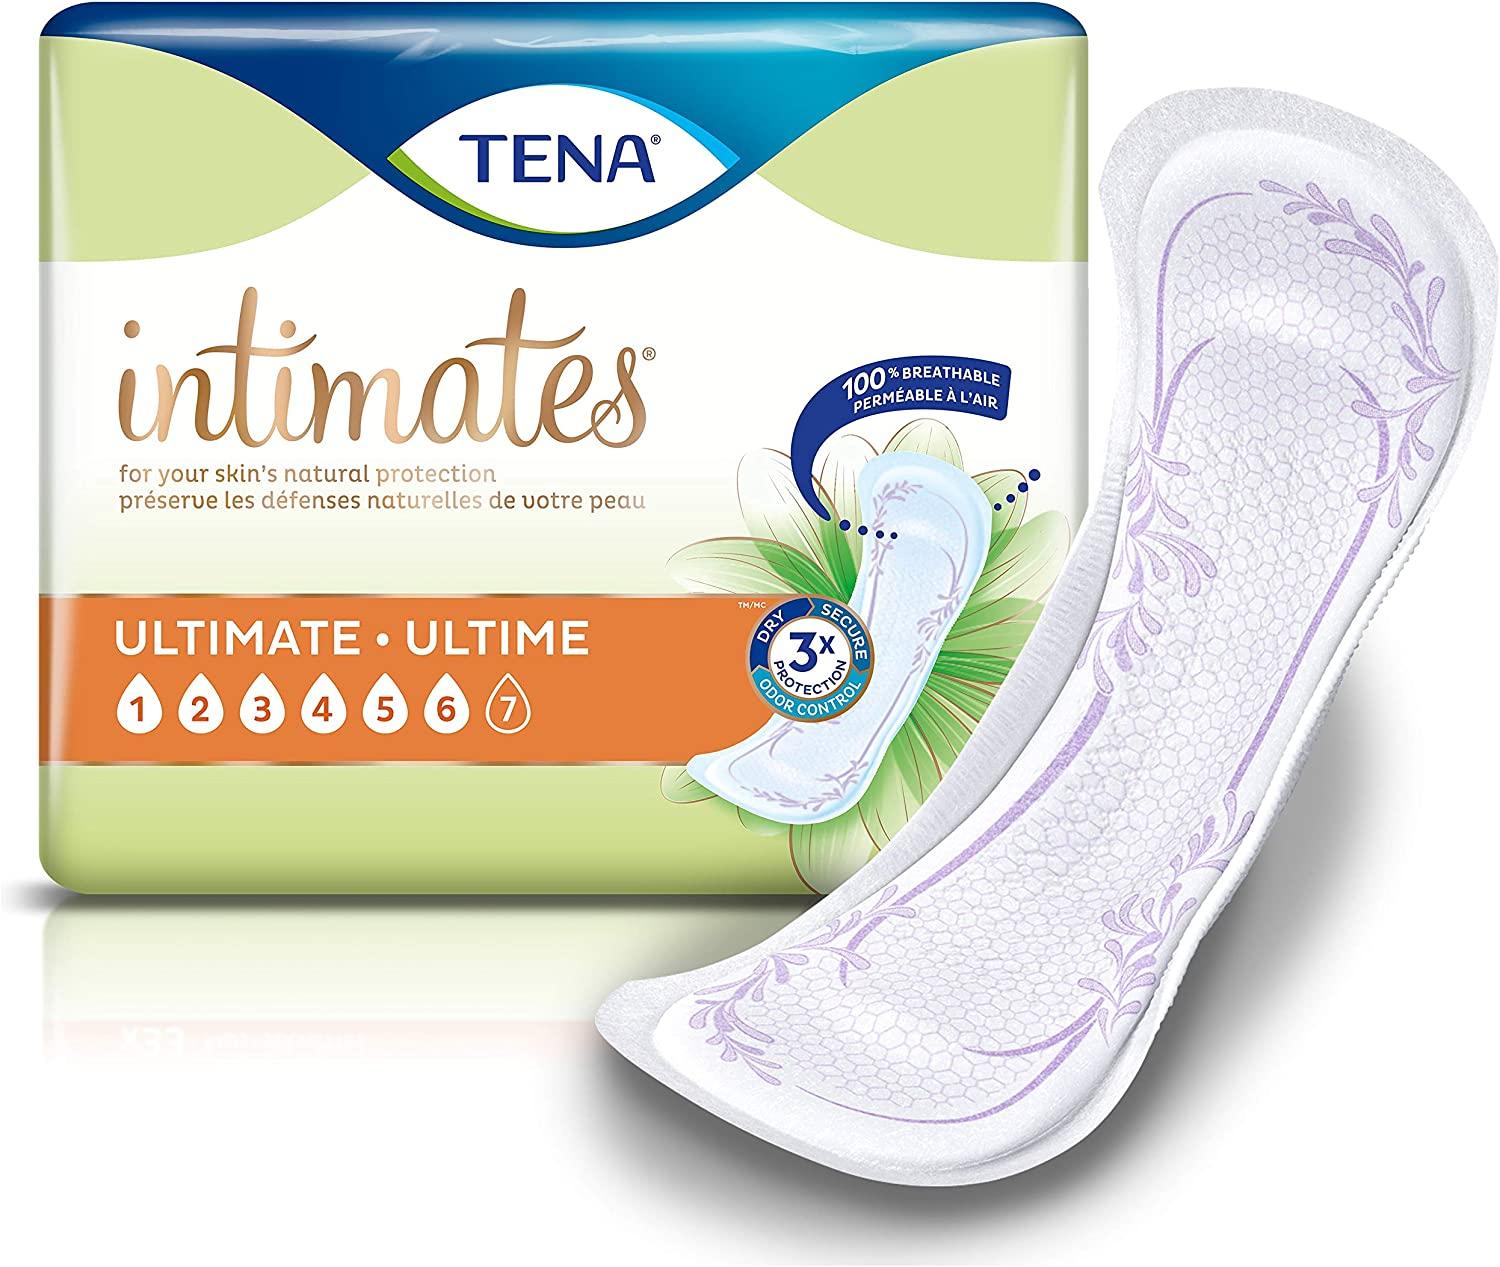 Tena 54295 Intimates Maximum Protection Long Incontinence Pads Case/117